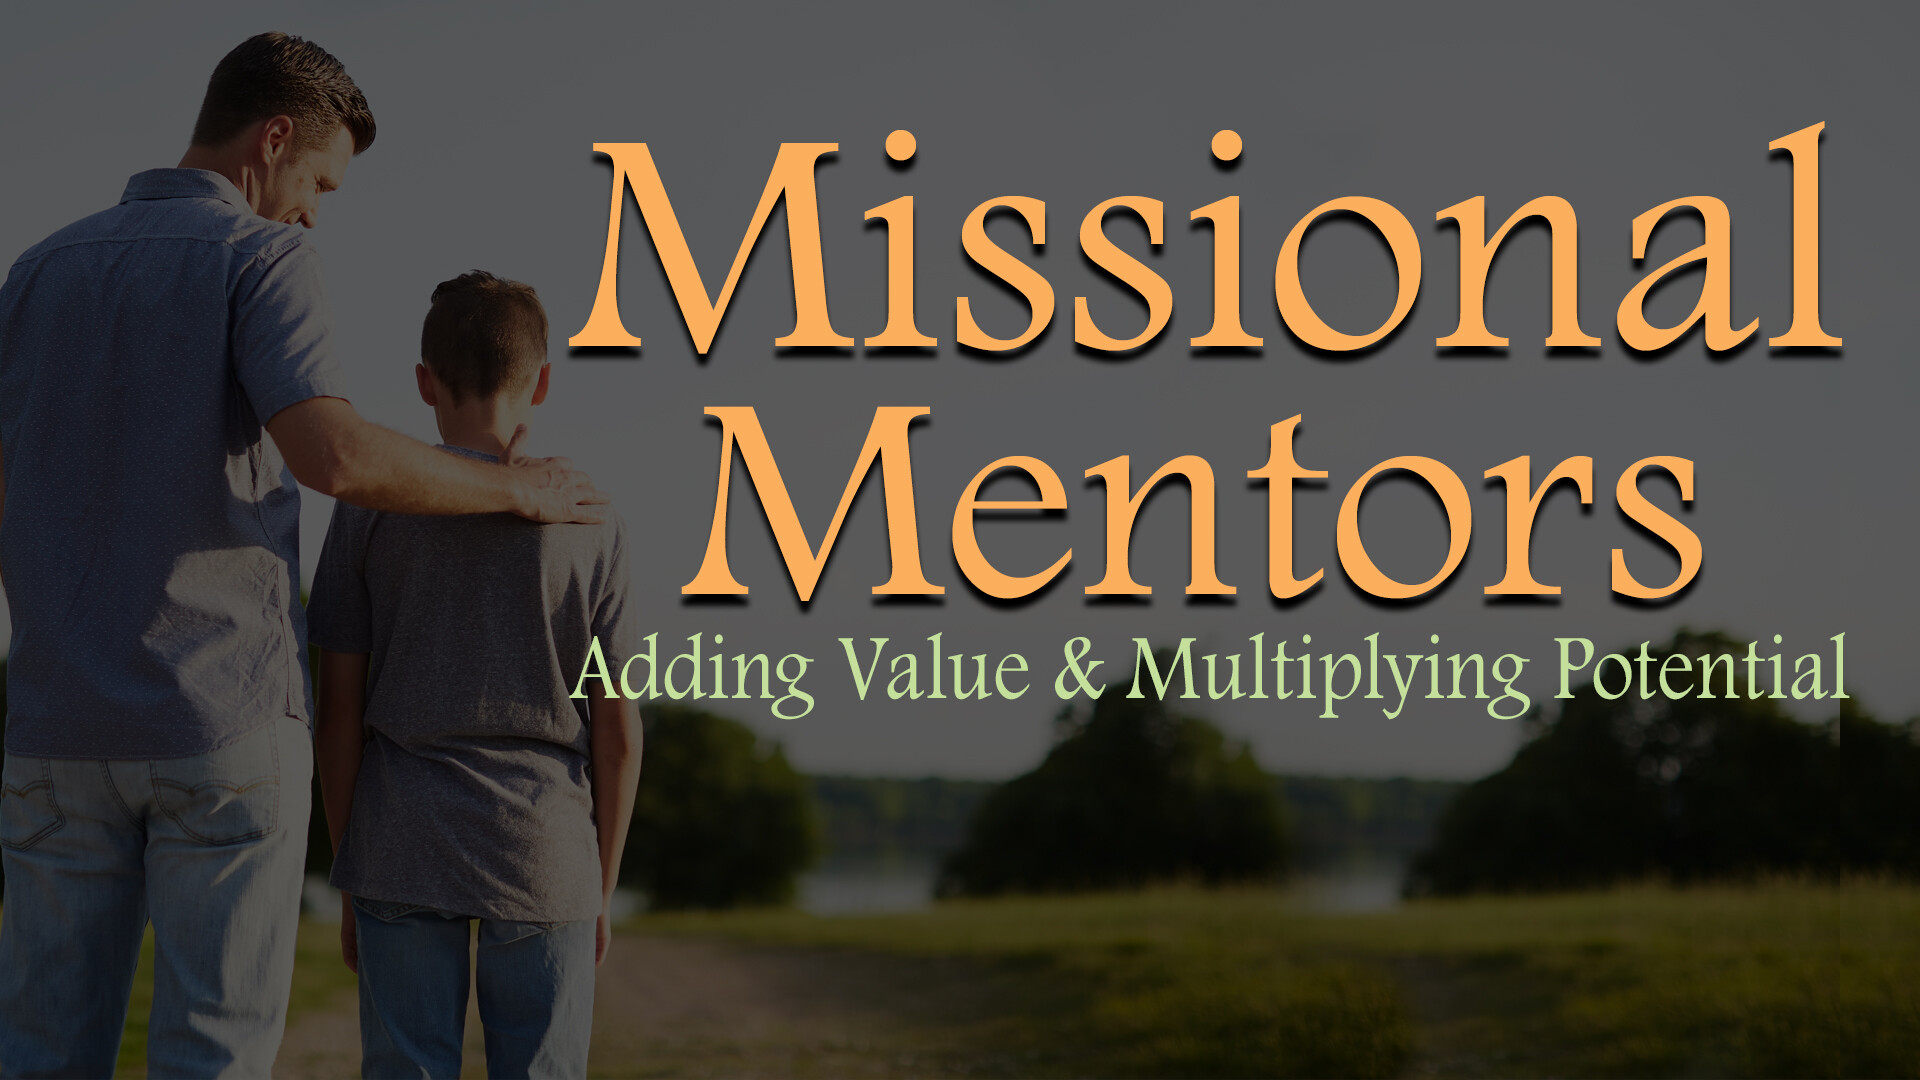 The Mentor's Prayer Strategy